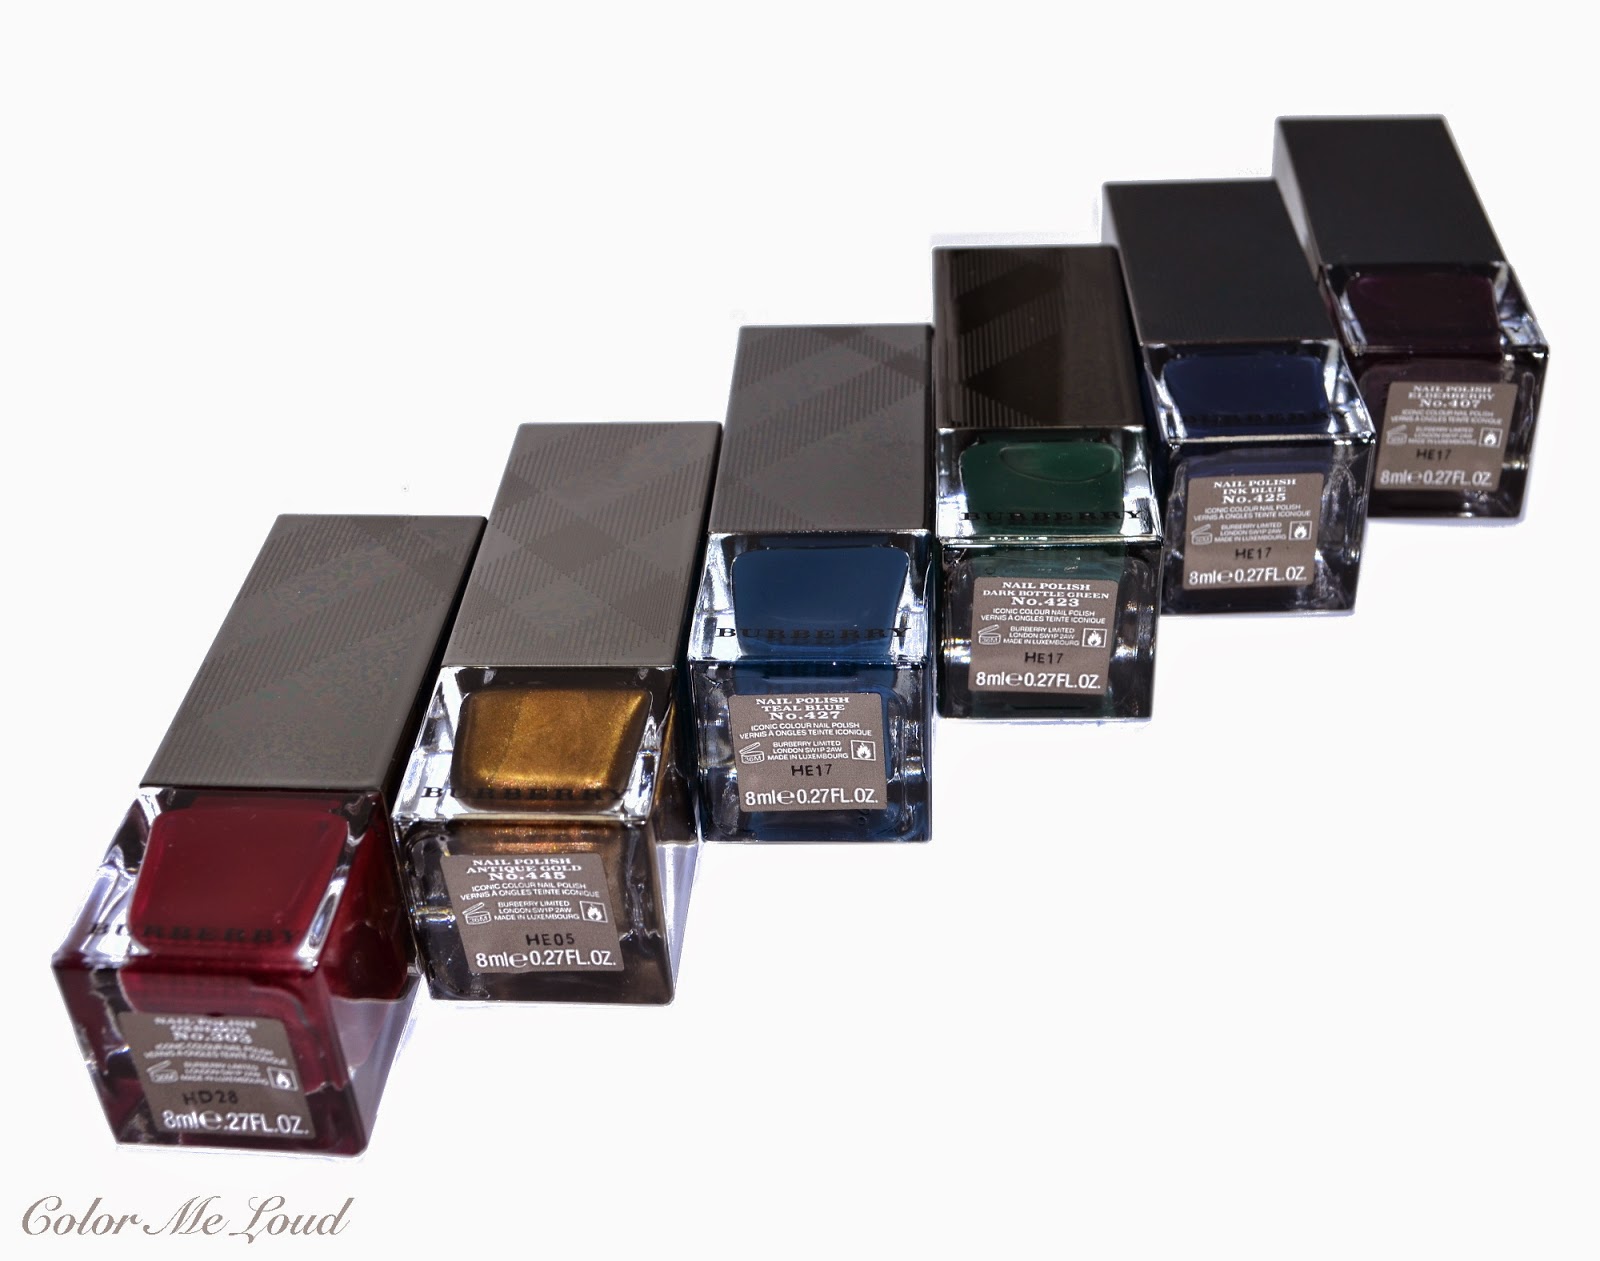 Burberry Nail Polish #407 Elderberry, #423 Dark Bottle Green, #425 Ink Blue, #427 Teal Blue and #445 Antique Gold from Bloomsbury Girls Collection for Fall 2014, Review & Swatches